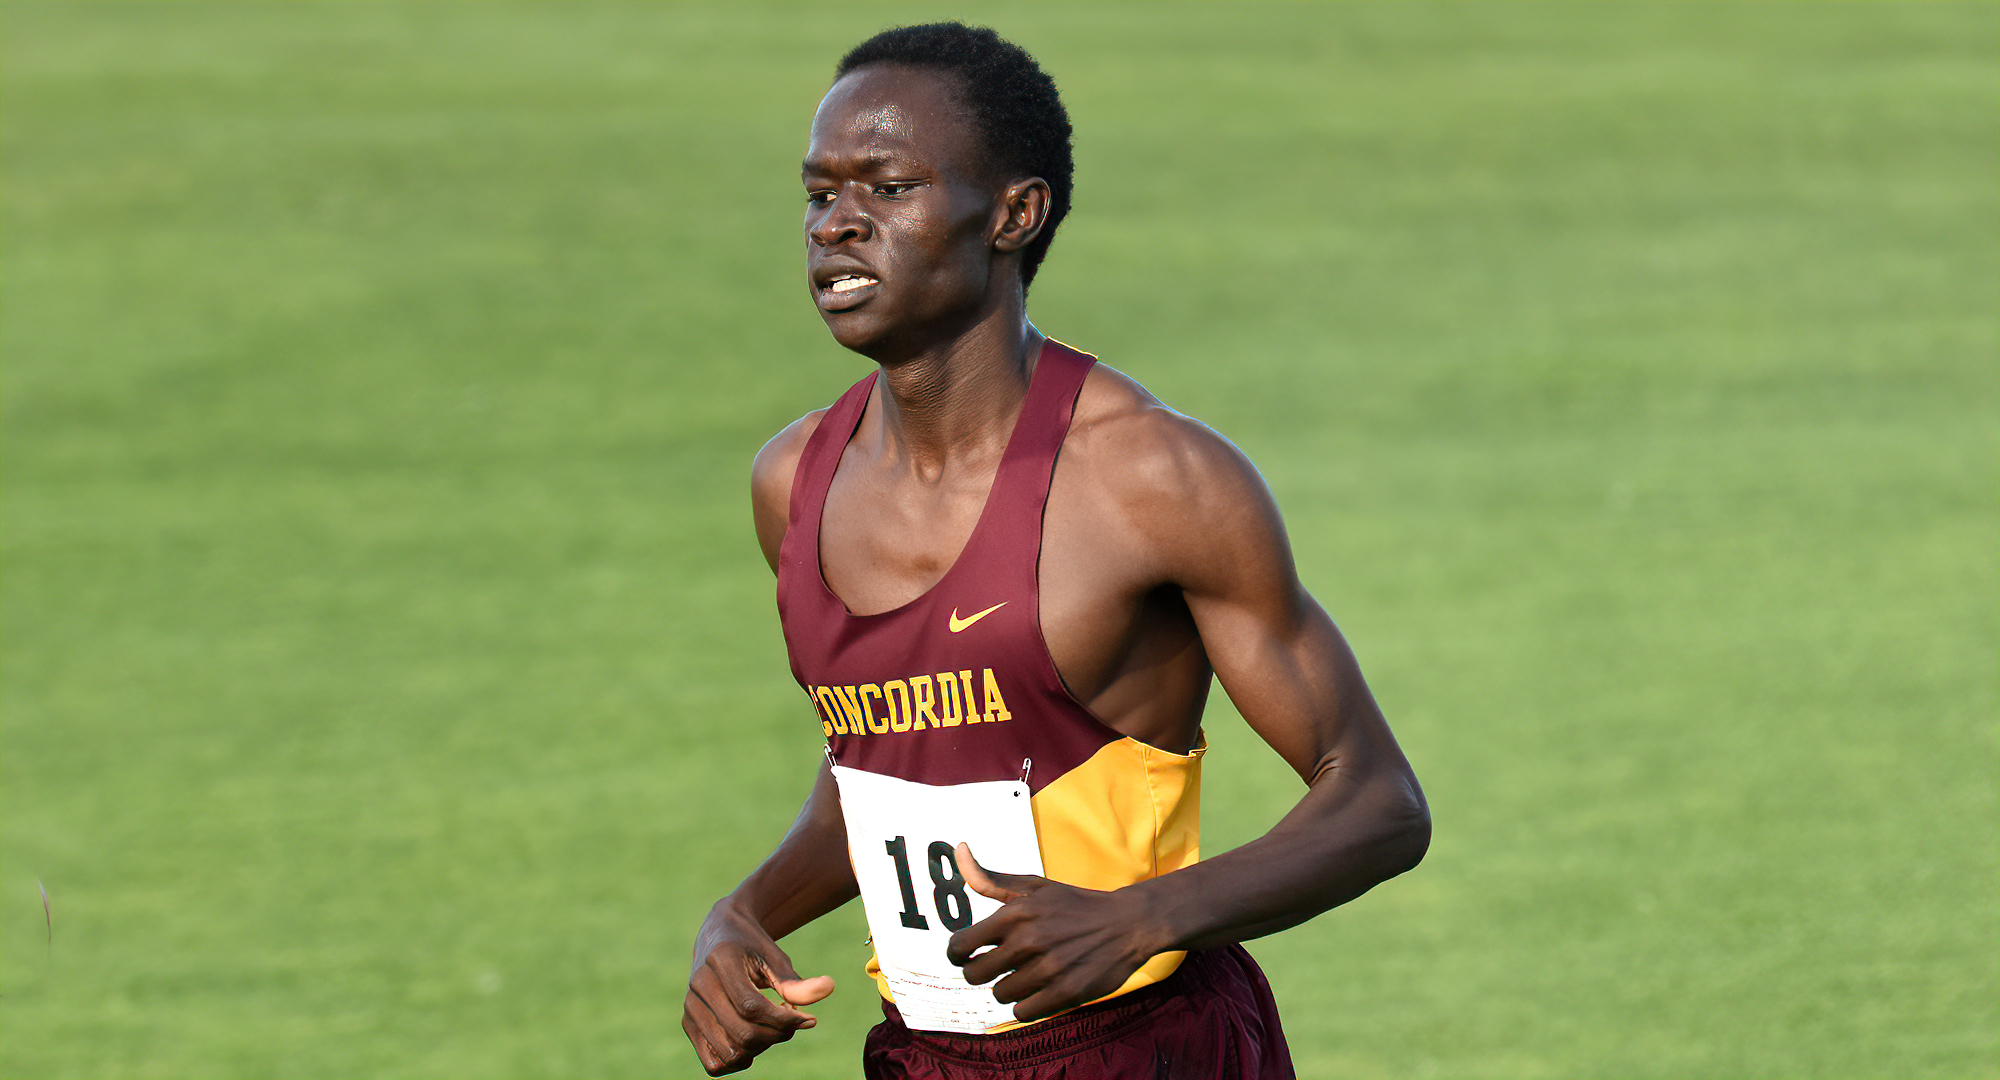 Senior Munir Isahak led Concordia at the season-opening UND Invite by finishing fourth in a time of 18:22.5.